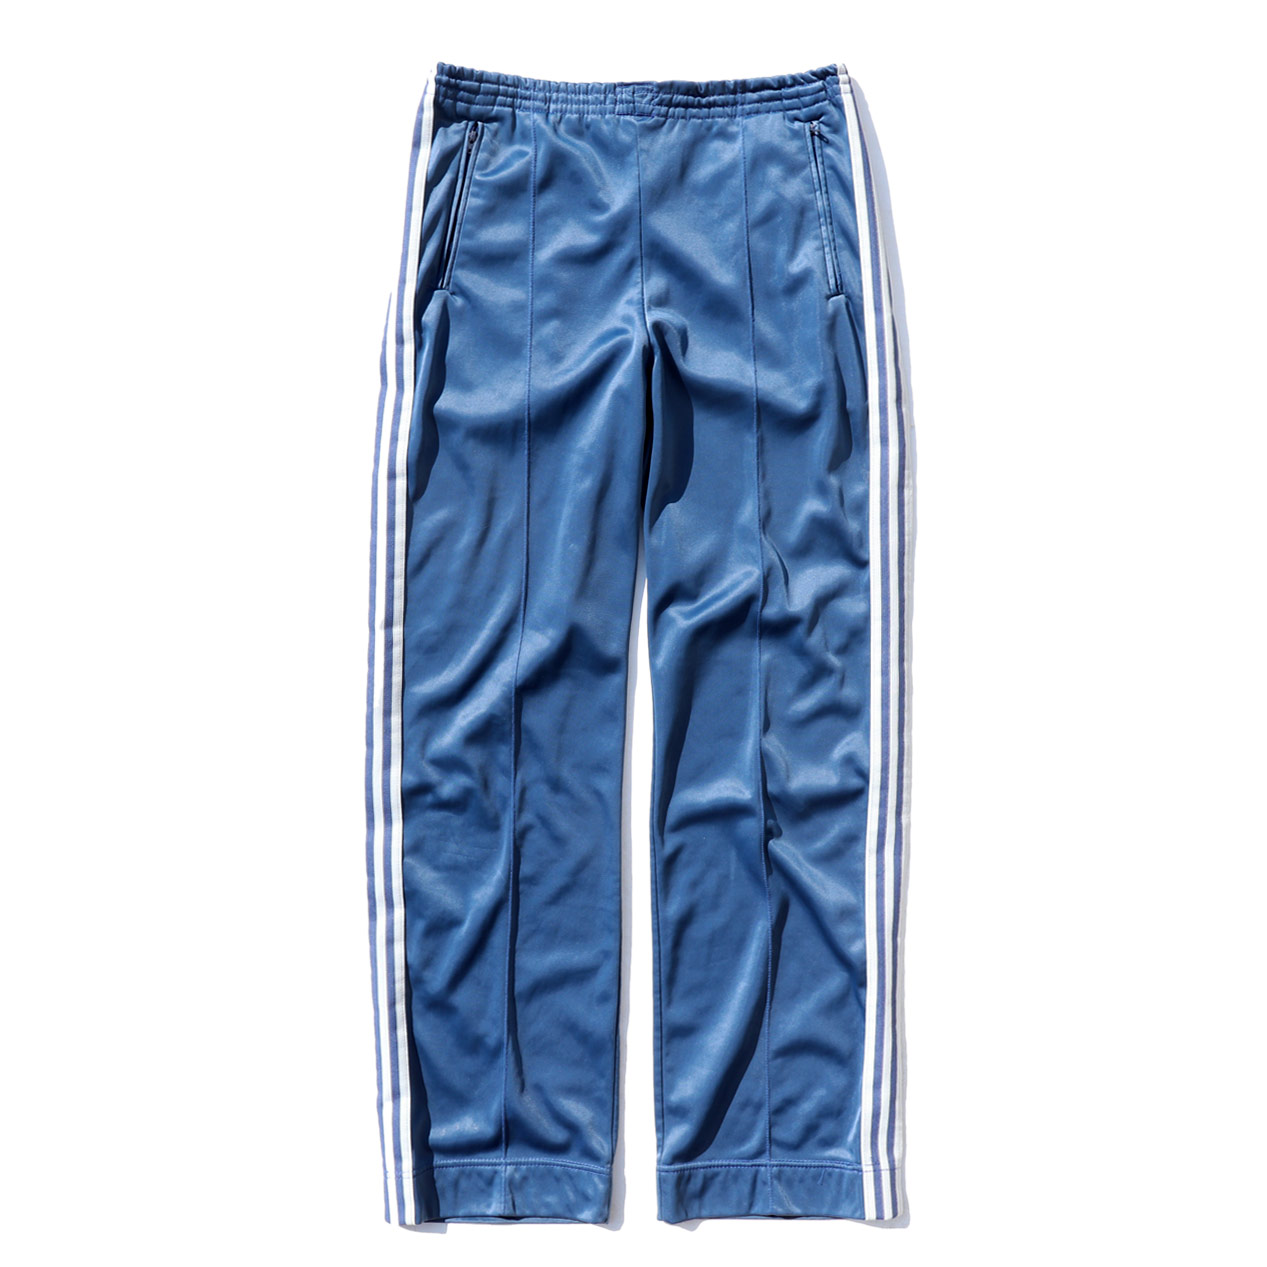 POST JUNK / 80's ADIDAS ATP Blue Gray Track Pants Made In U.S.A. [L]